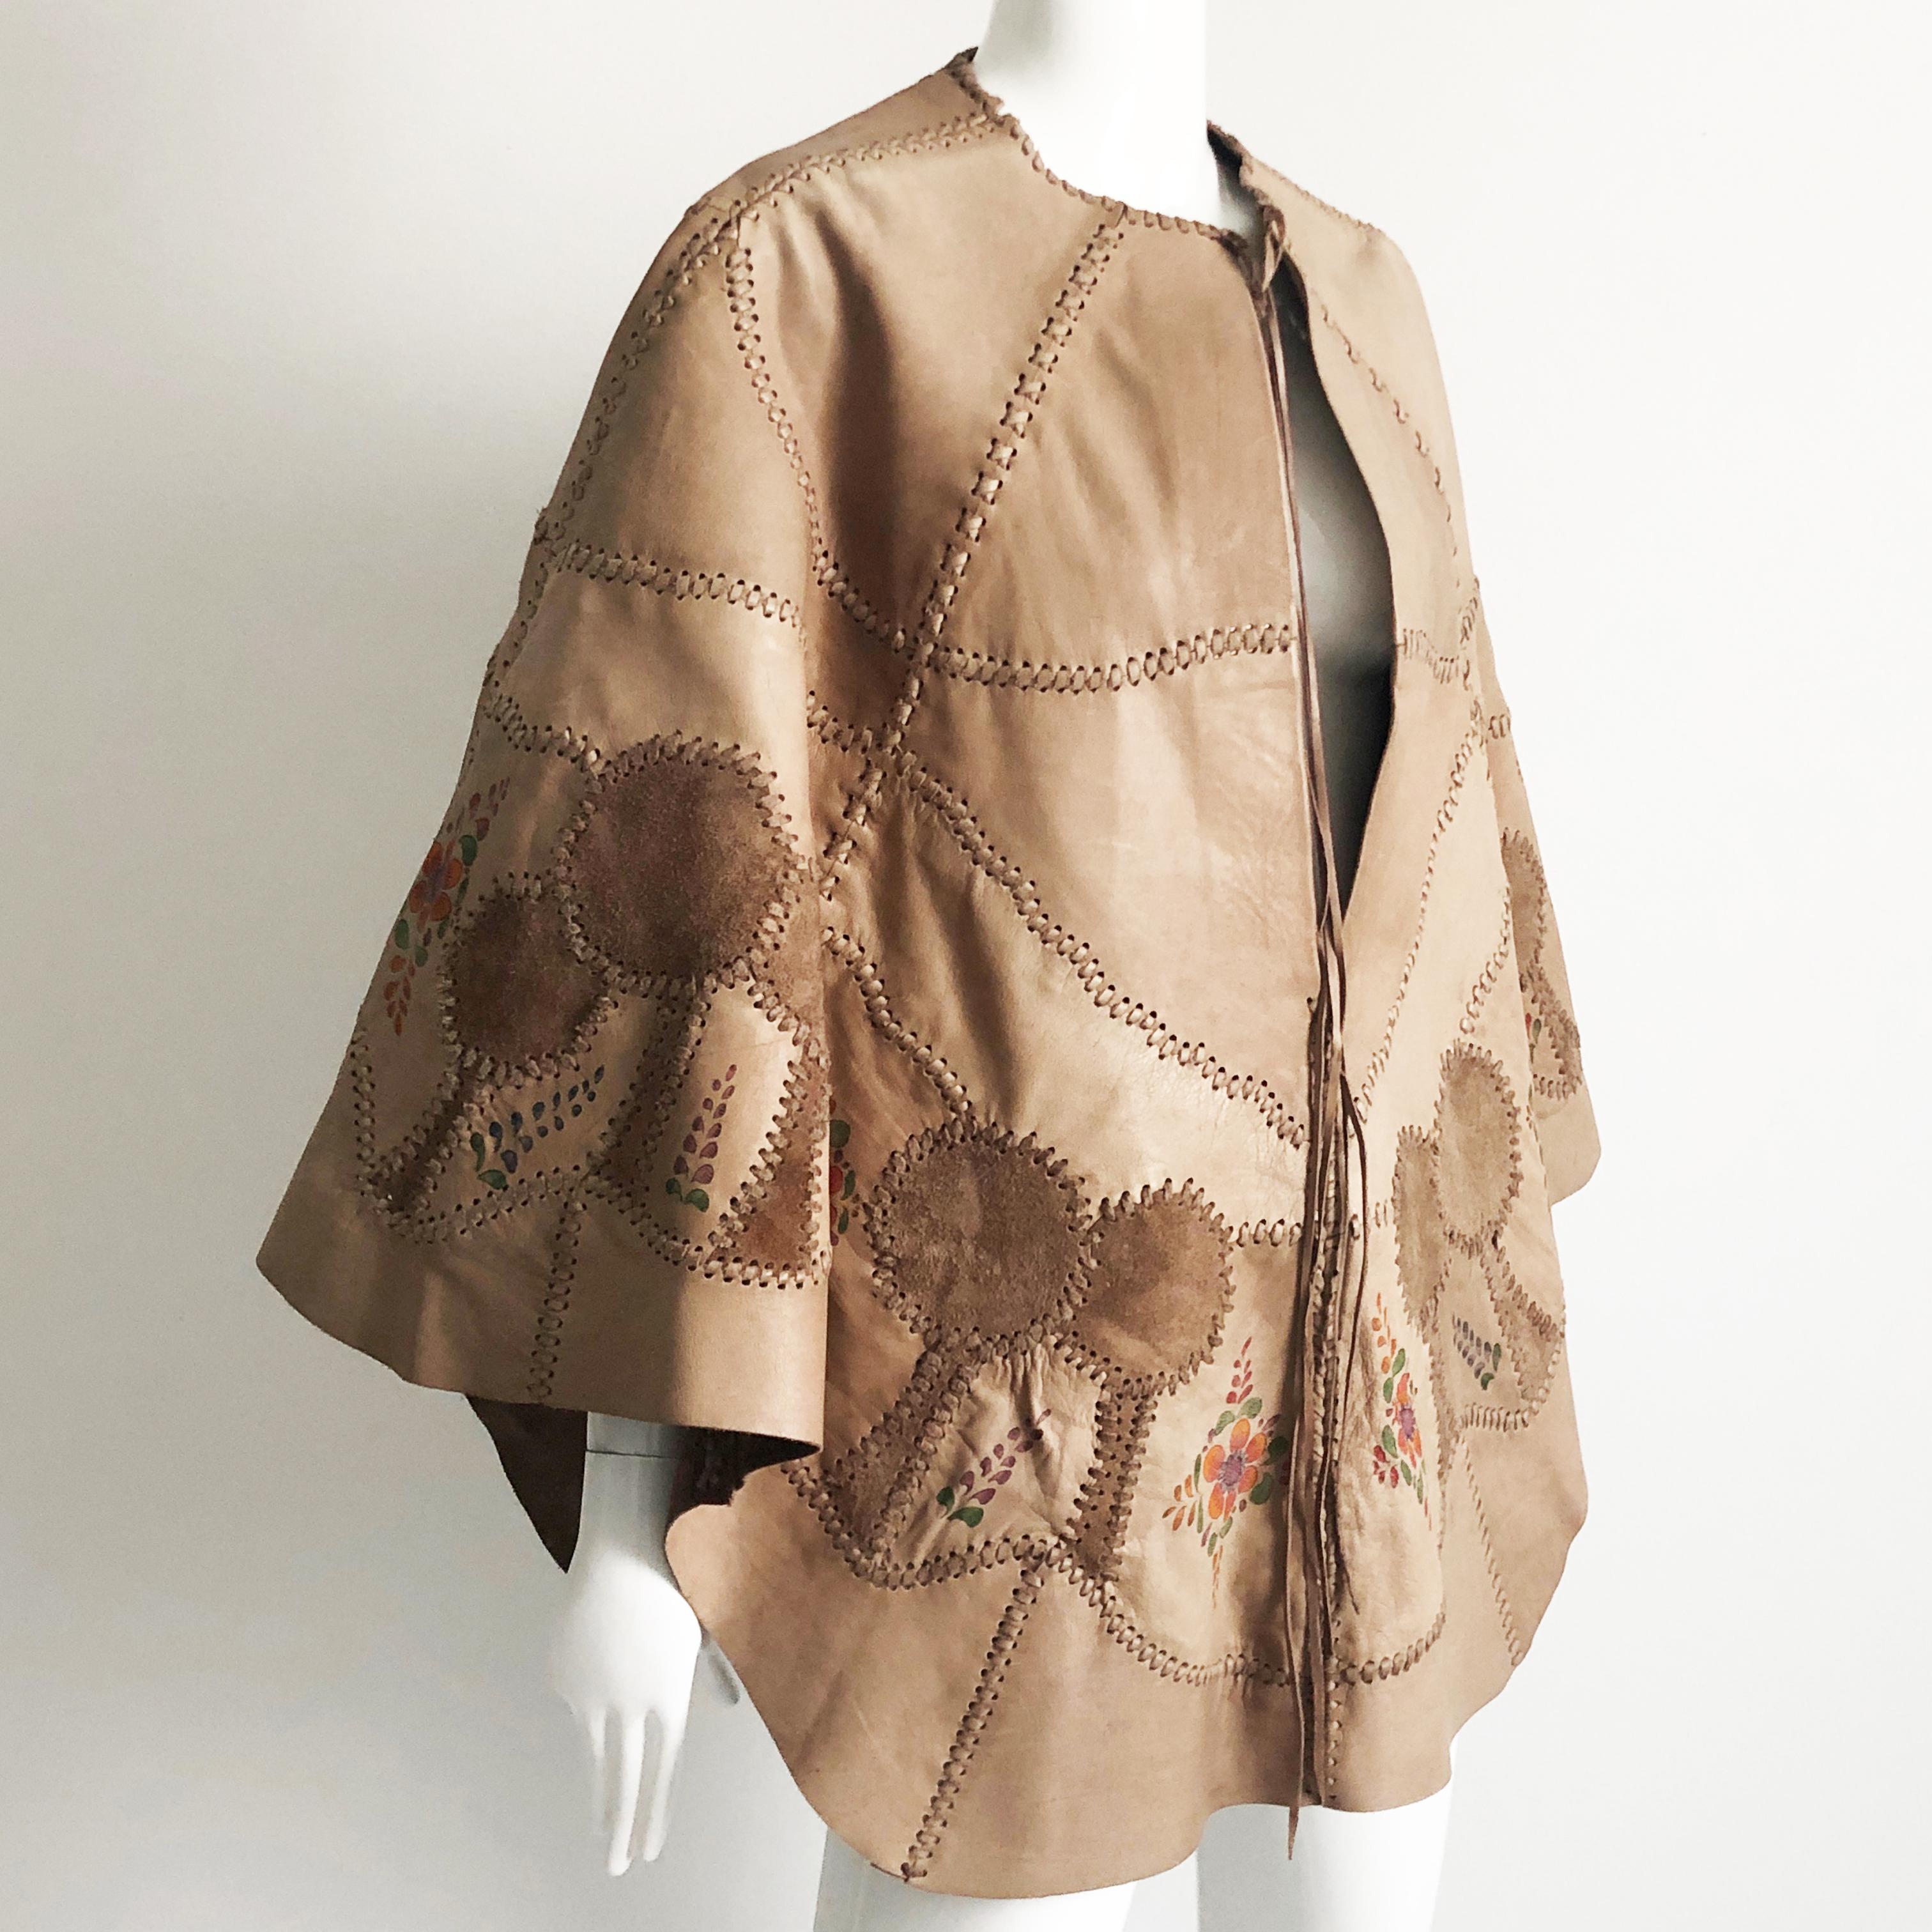 Authentic, preowned, vintage CHAR Leather whipstitched poncho or cape with handprinted florals, made in the 70s. Unlined, fastens at collar with leather strip ties. Perfect festival or boho look (and so hard to find nowadays especially in this color